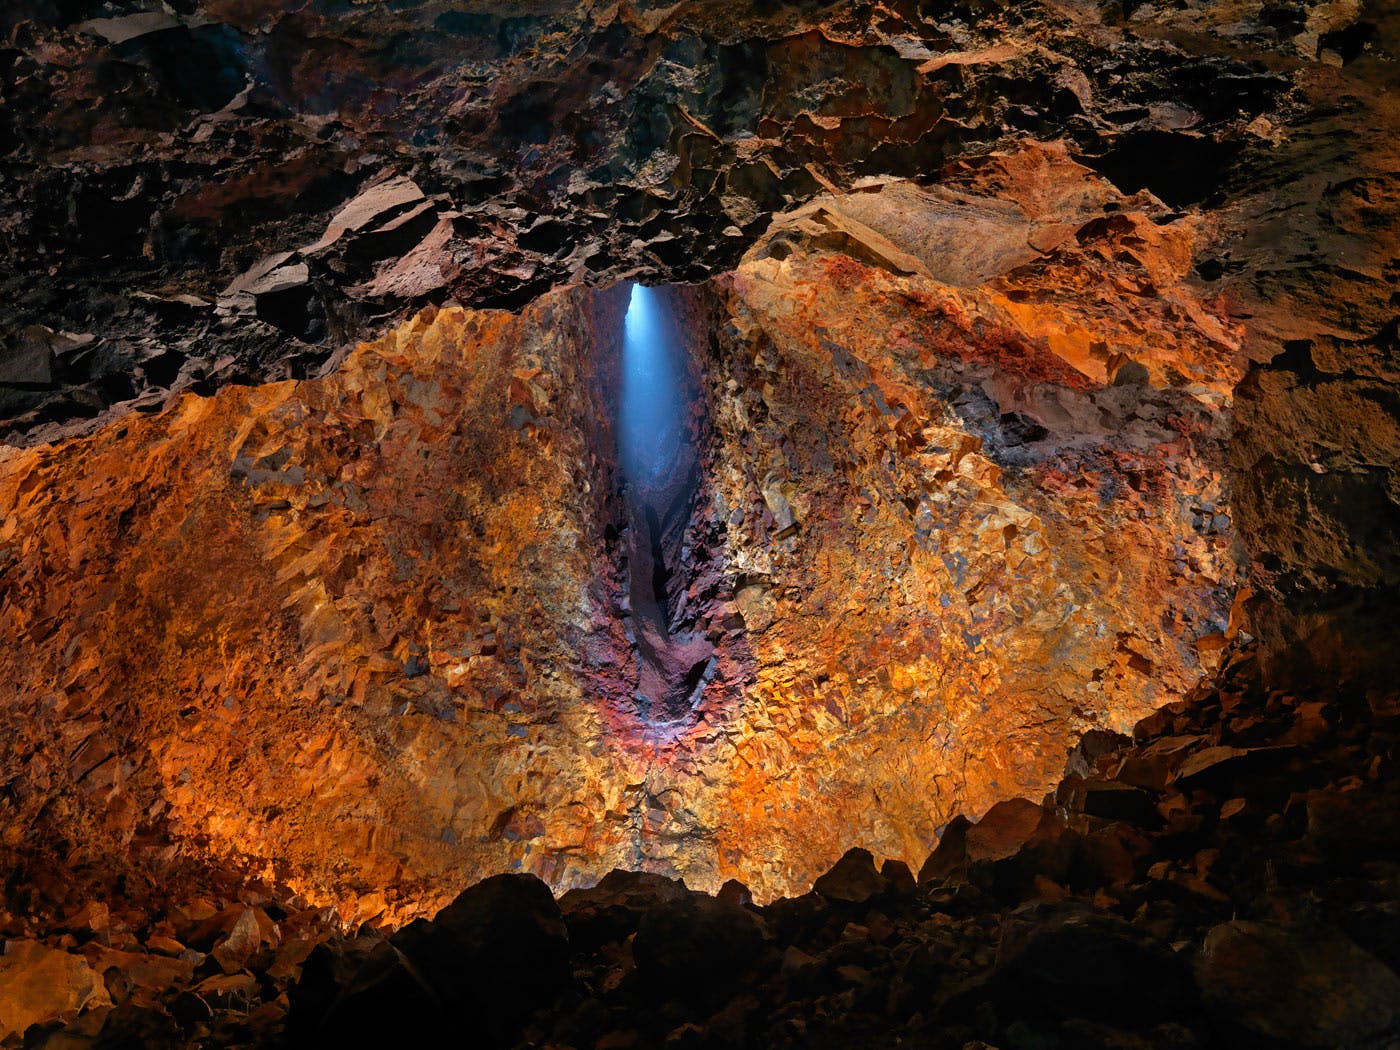 Thrikunkagigur is a magma chamber that visitors can take a lift into.